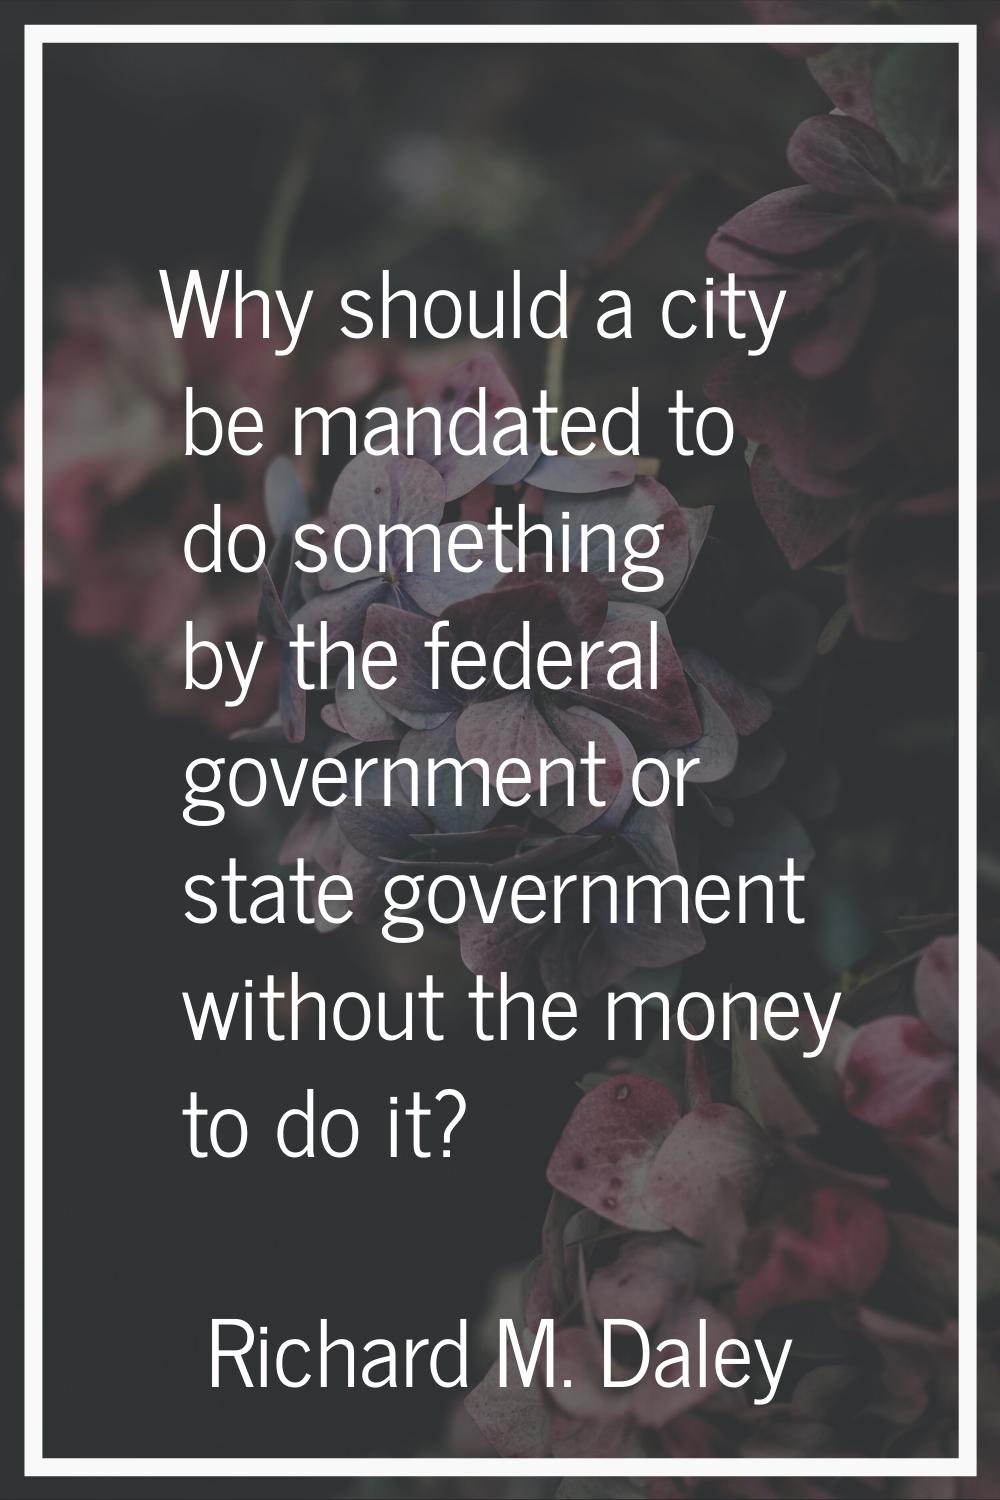 Why should a city be mandated to do something by the federal government or state government without